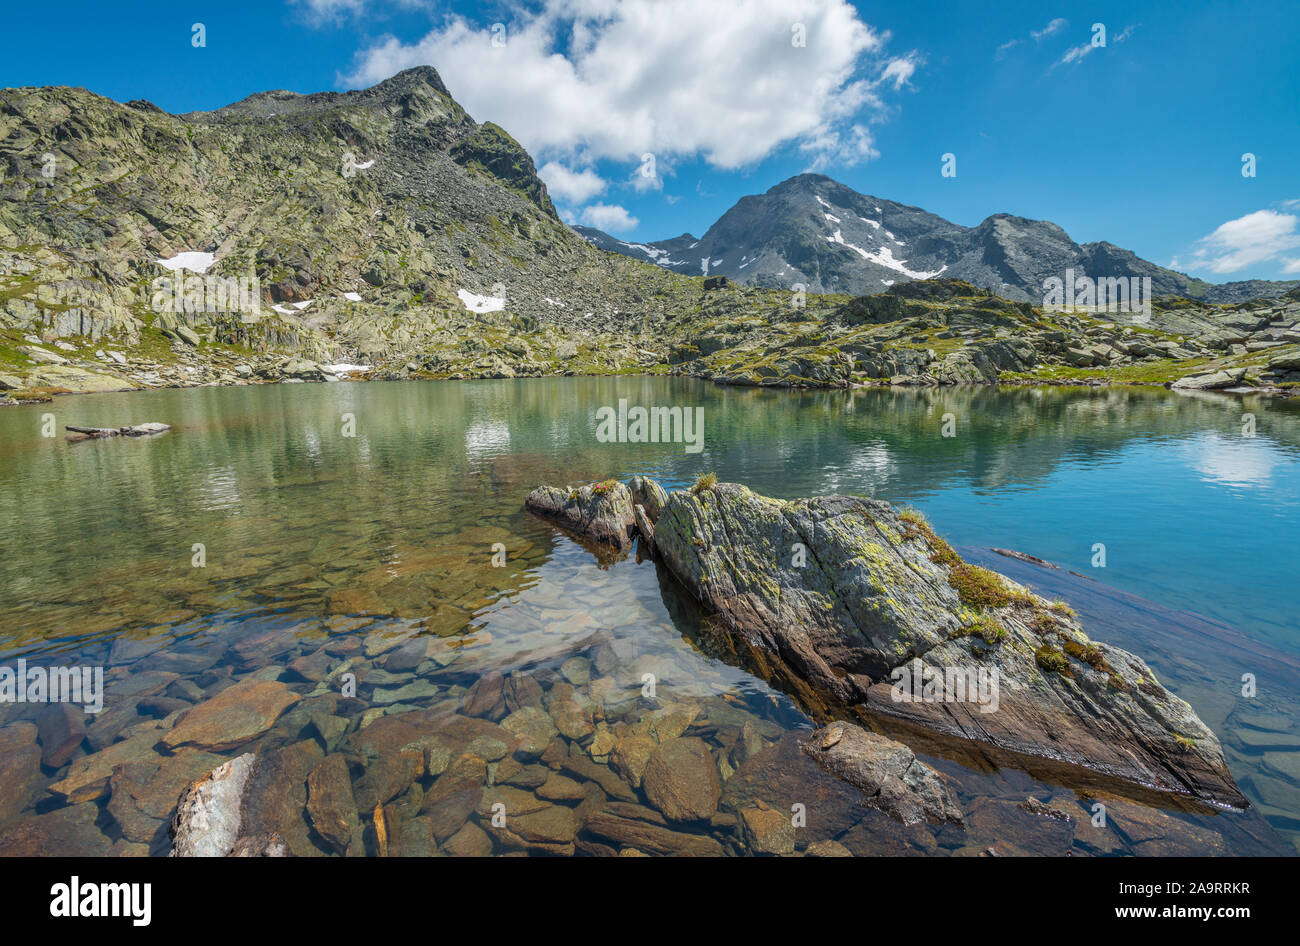 Pretty alpine tarn, beautiful mountain lake with mountains reflected in the calm water. Reflections of mountains and snow in mirror-still lake. Stock Photo